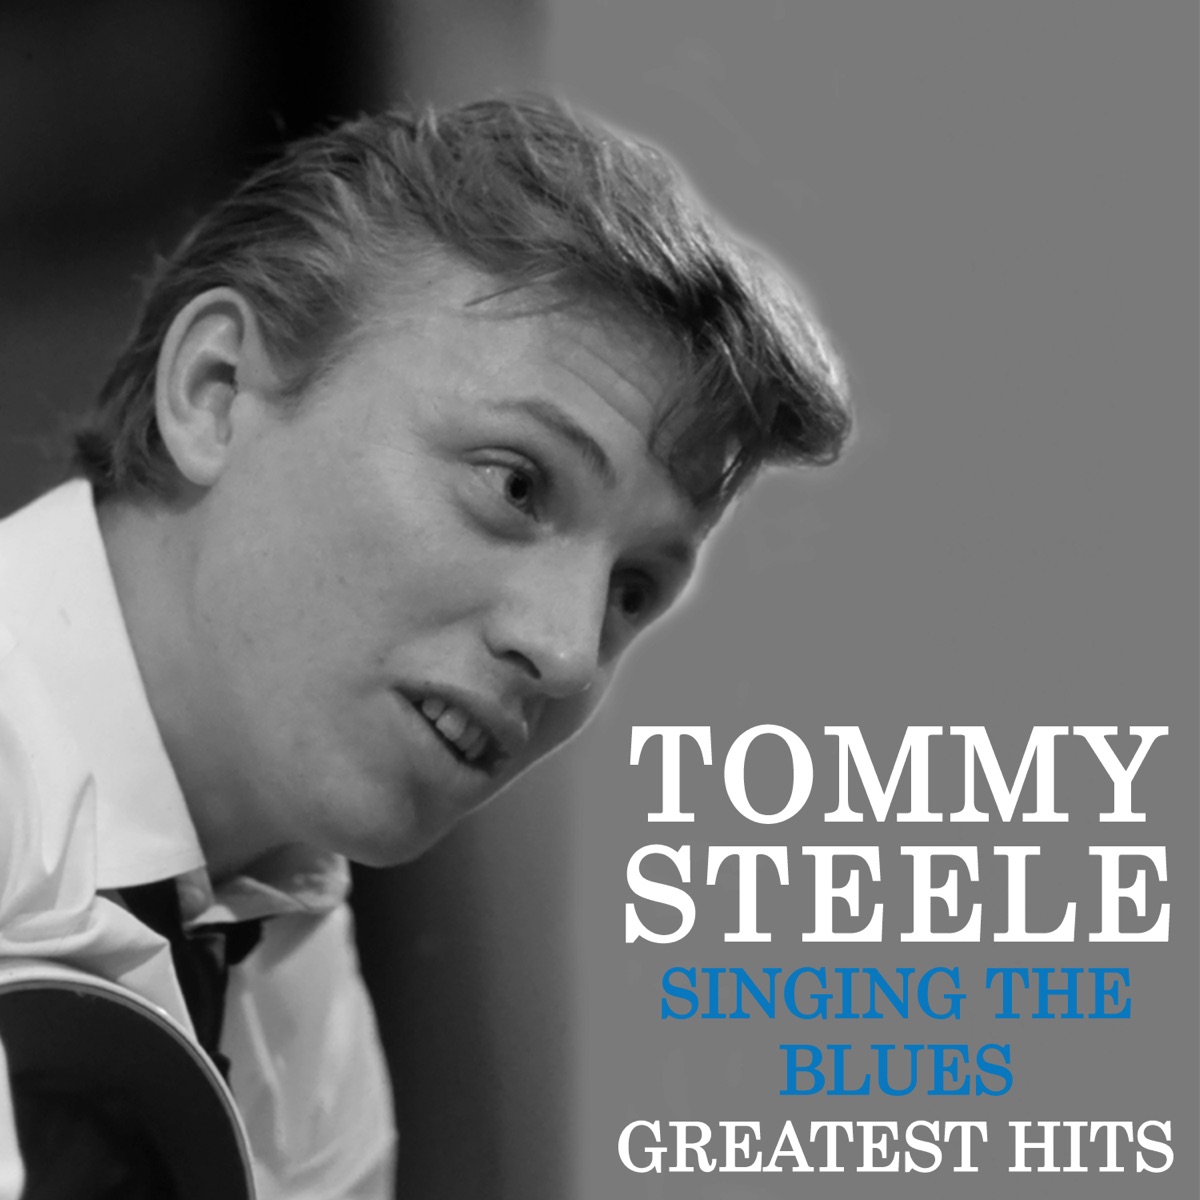 Singing the Blues - Tommy Steele's Greatest Hits - Album by Tommy Steele -  Apple Music